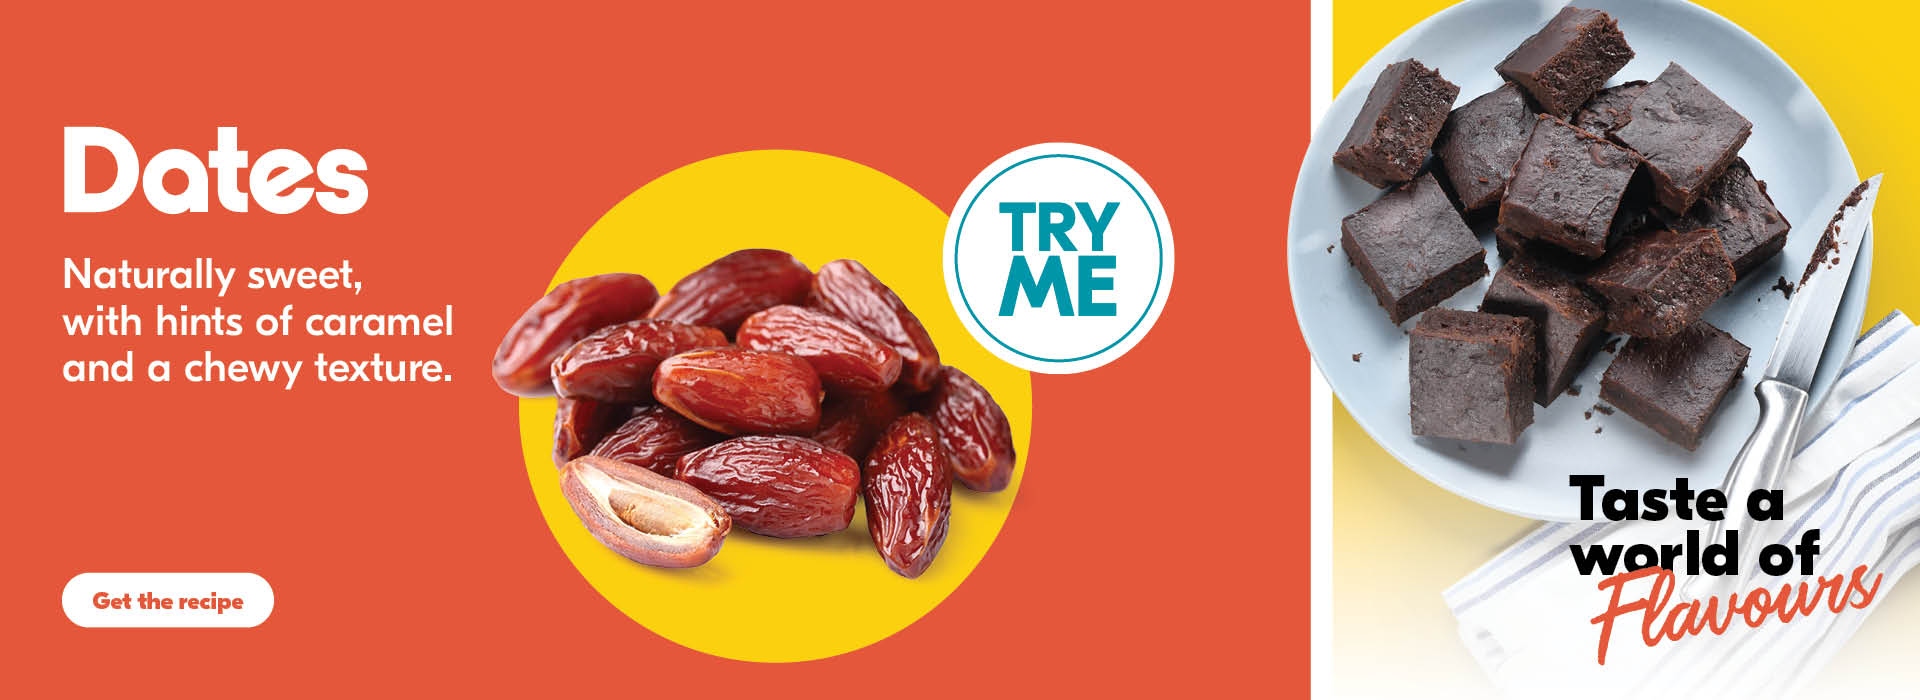 Dates, Naturally sweet with hints of caramel and chewy texture. Taste a world of flavours. Get the Recipe.